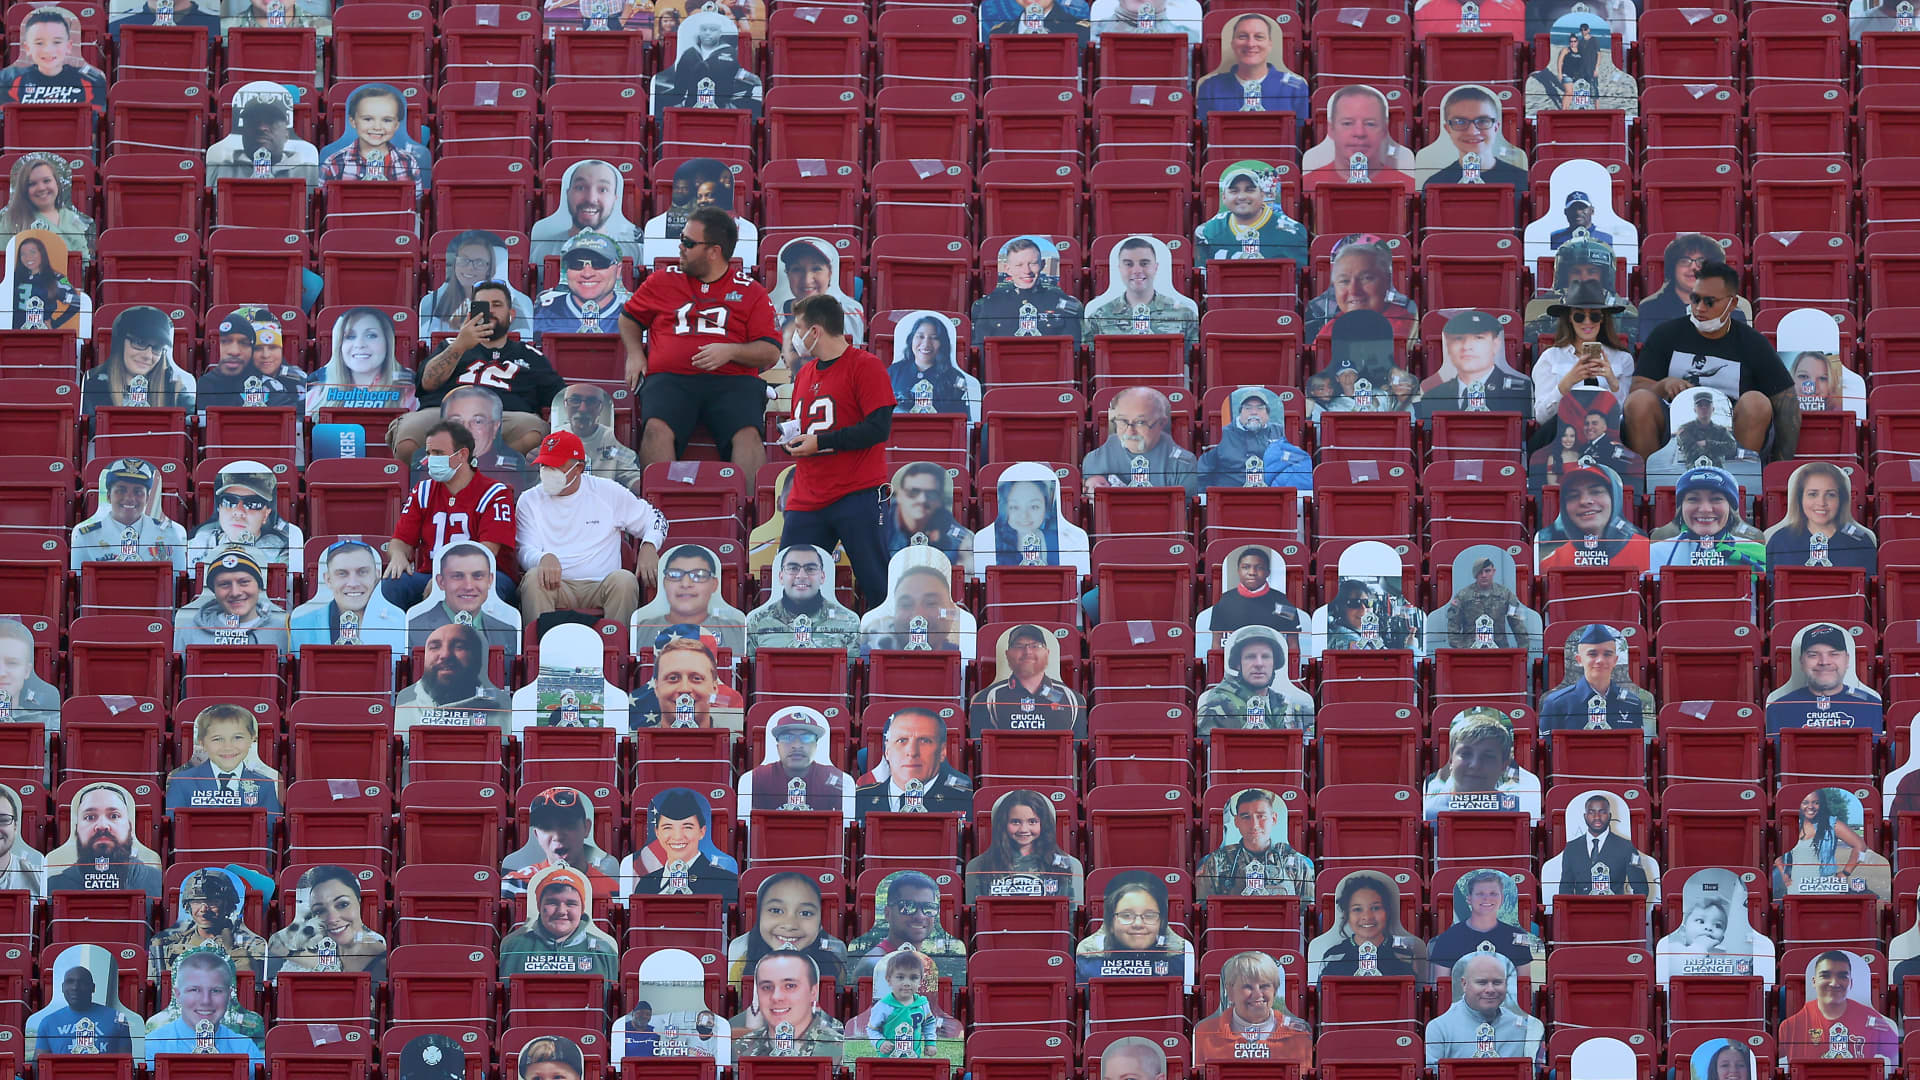 Fans sit among cardboard cutouts before Super Bowl LV between the Tampa Bay Buccaneers and the Kansas City Chiefs at Raymond James Stadium on February 07, 2021 in Tampa, Florida.